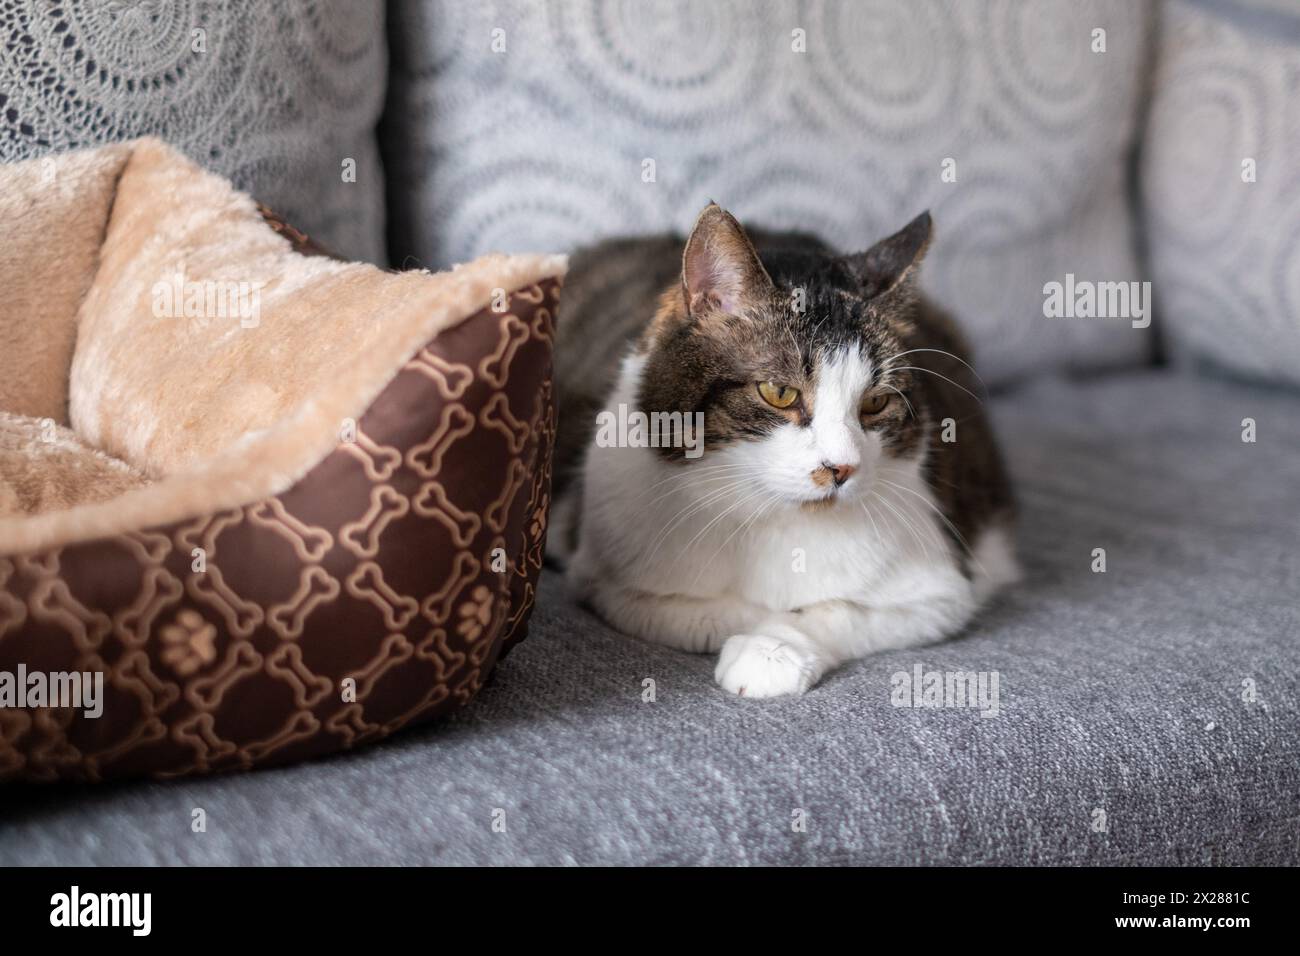 White and brown cat with a thoughtful expression lying next to a plush cat bed on a grey sofa. High quality photo Stock Photo